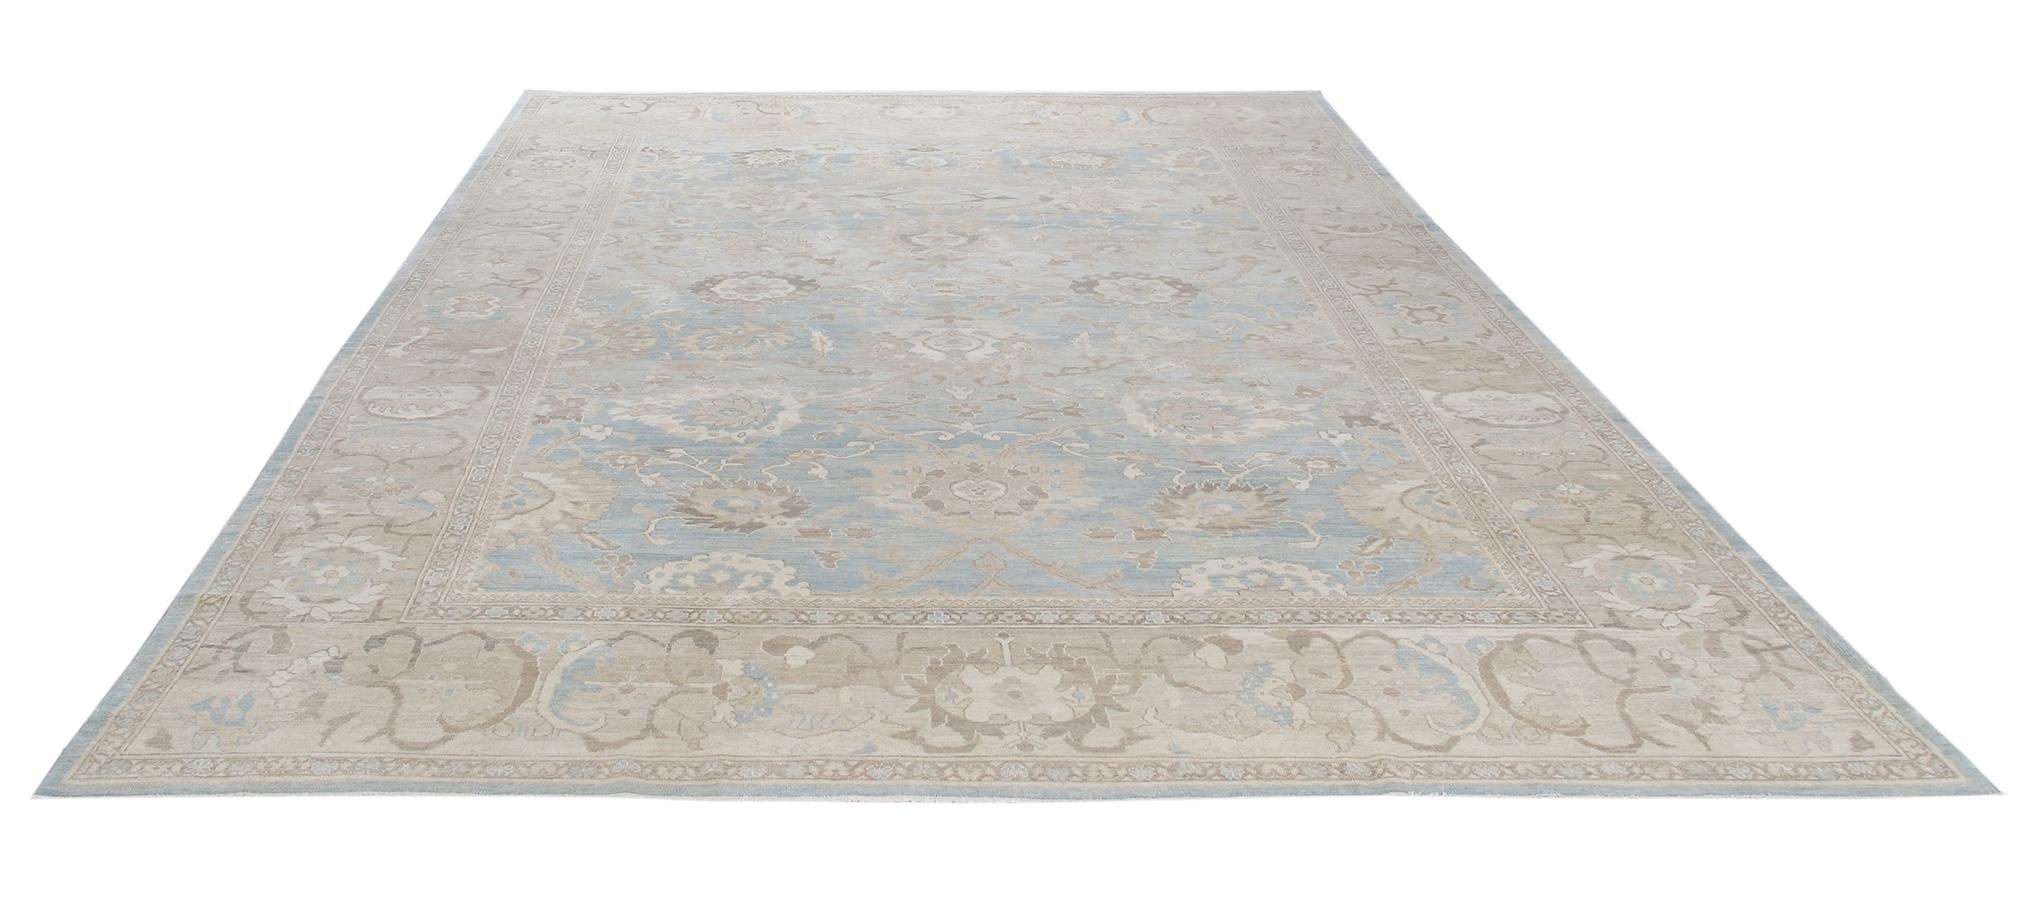 Hand-Knotted Original Persian Ziegler Sultanabad Rug in Pale Blue and Beige For Sale